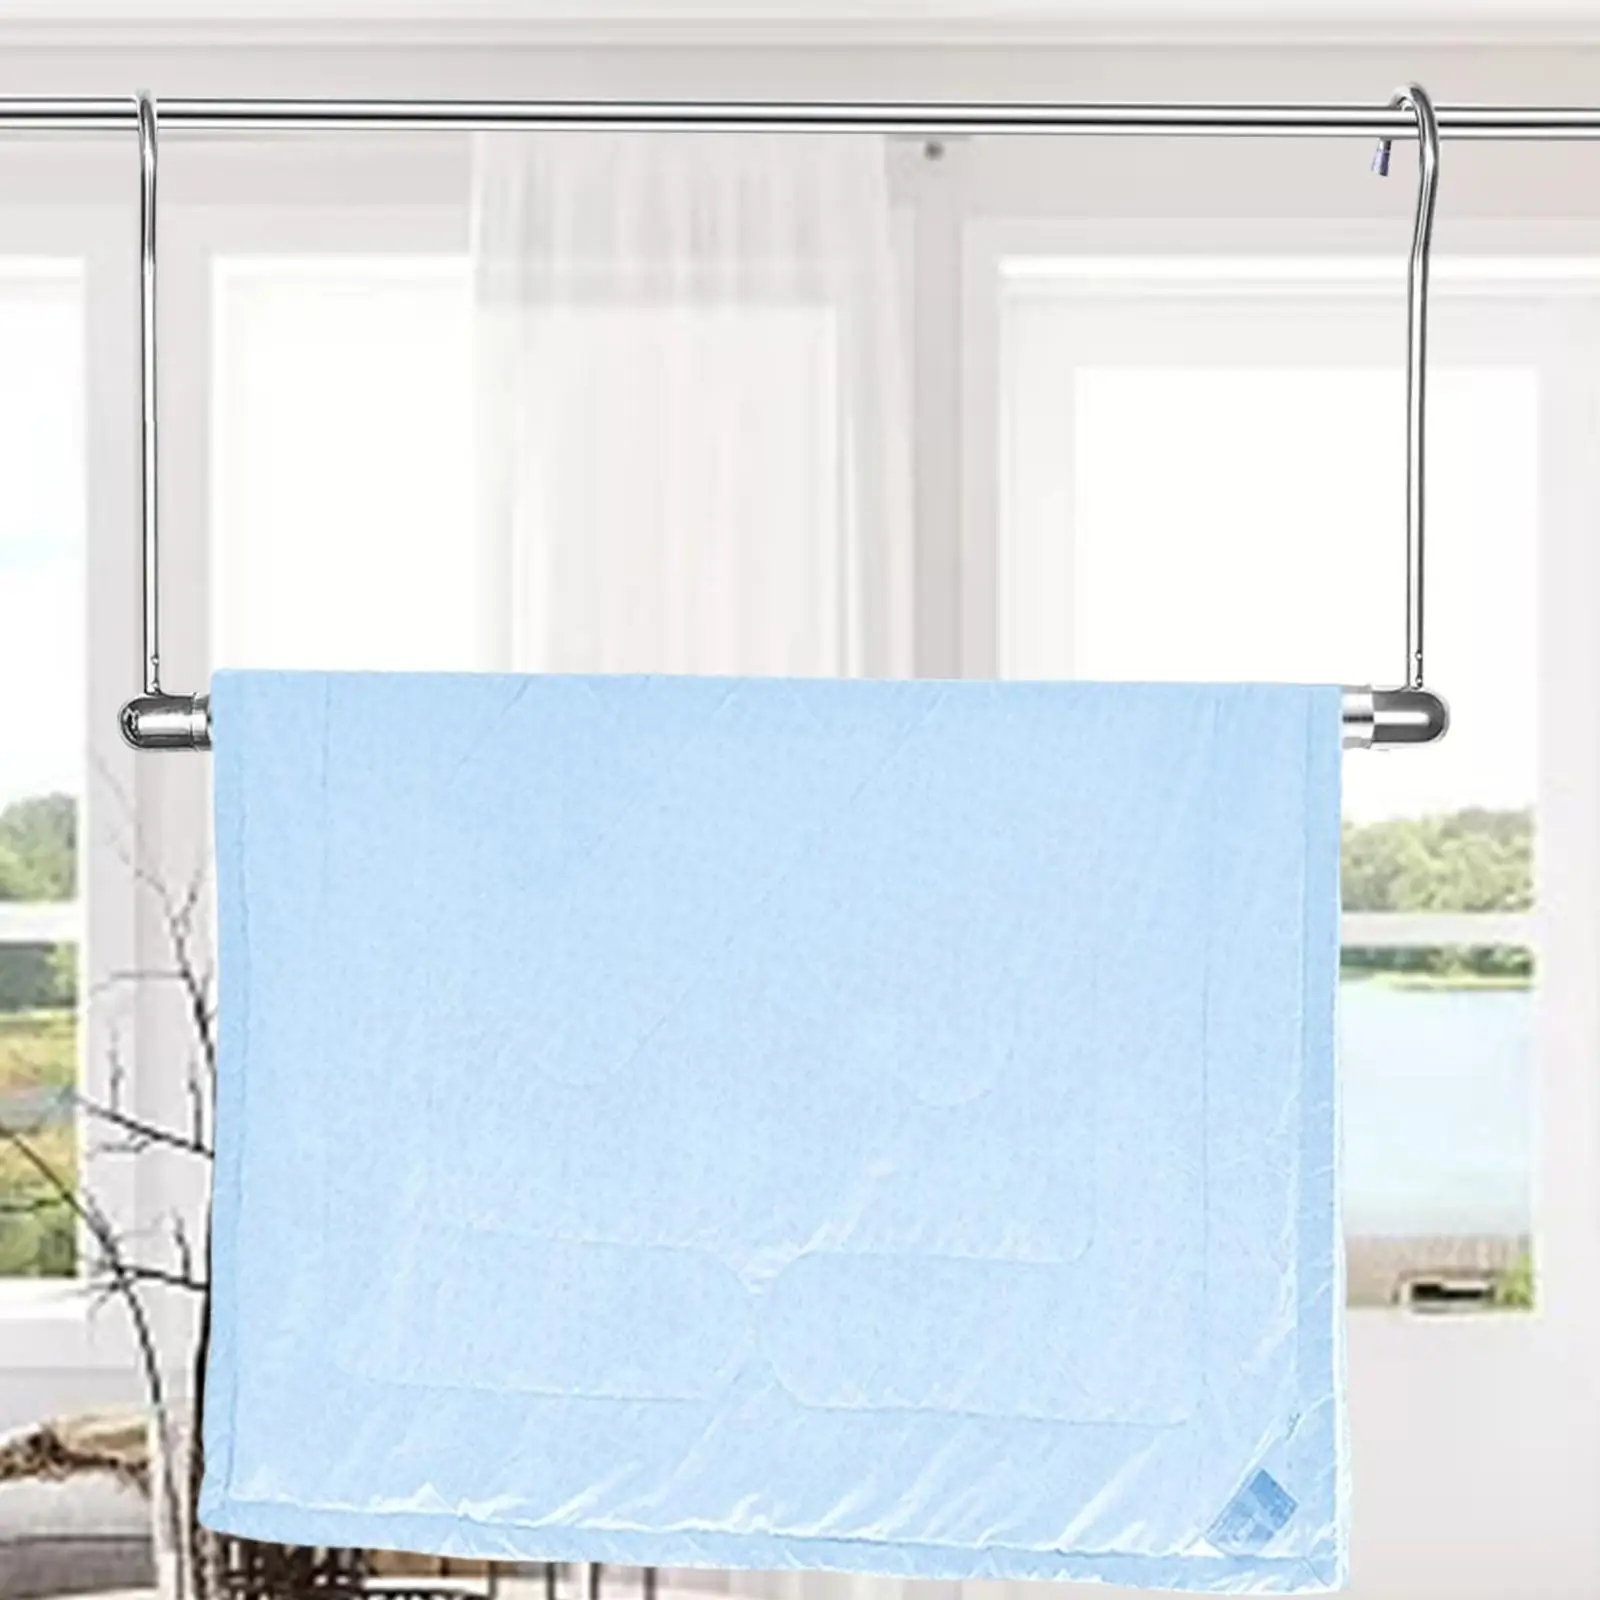 Clothing Hanger Telescopic Rod Hanging Closet Rod Clothes Drying Rack Support Rod with Hooks for Closet Laundry Room Bathroom